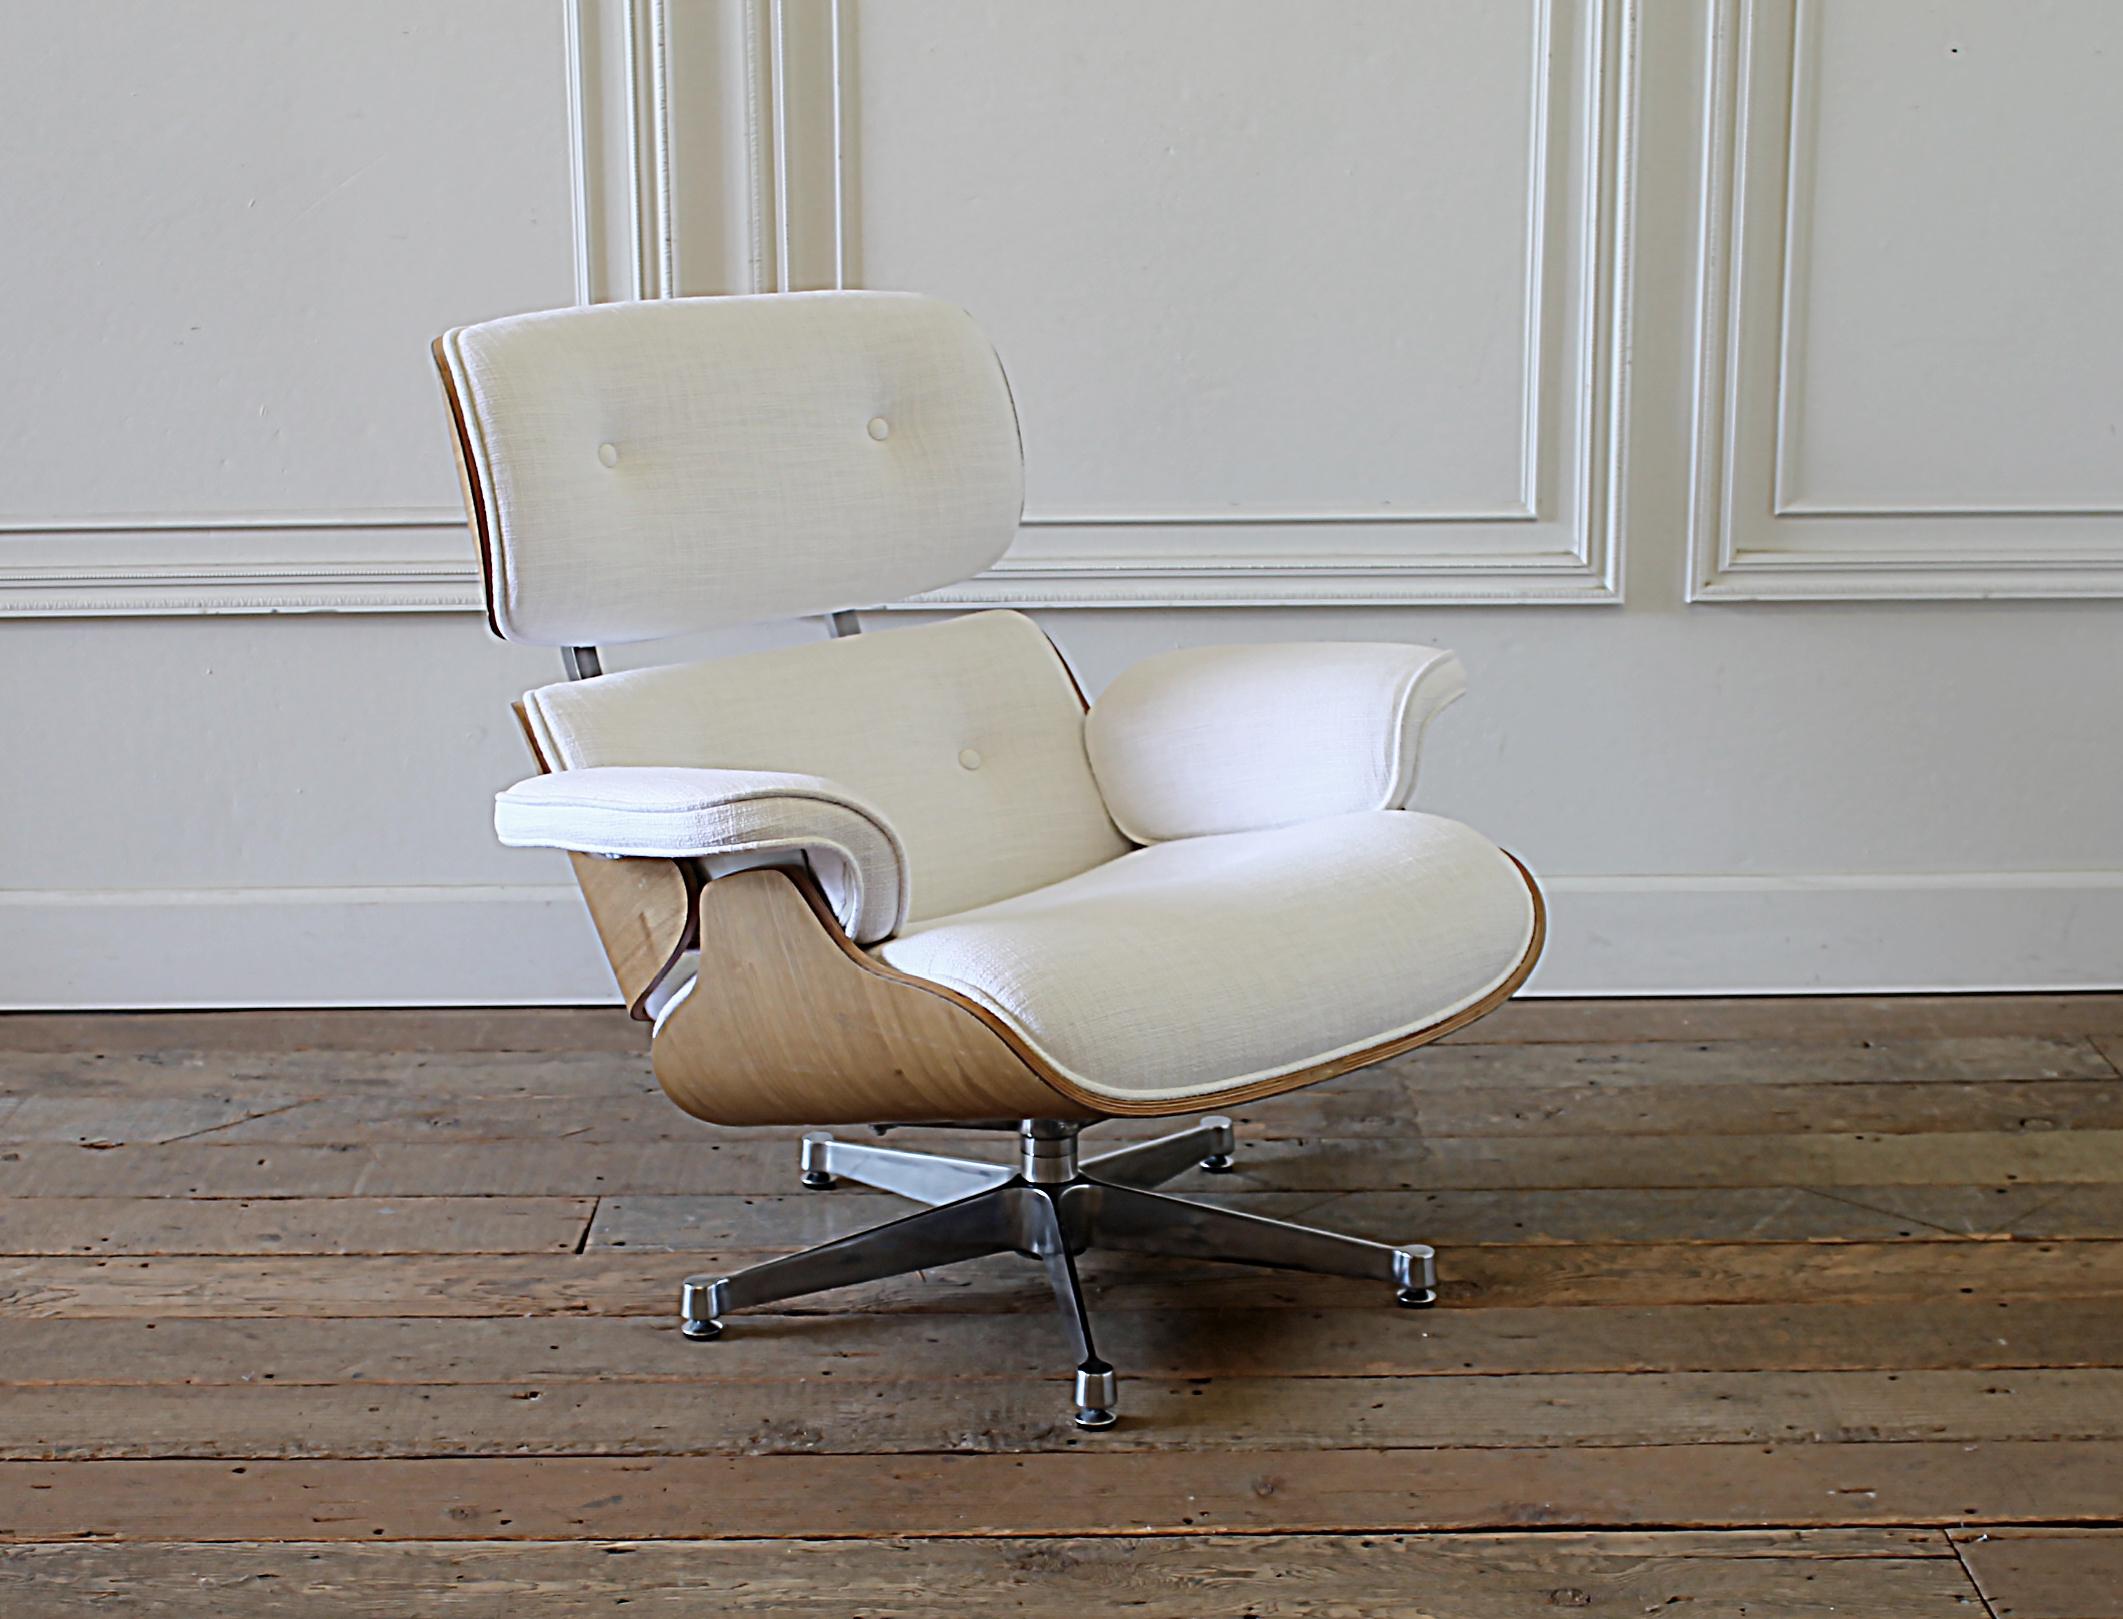 Mid-Century Modern Eames Style Chair and Ottoman in Coated White Linen Blend Upholstery